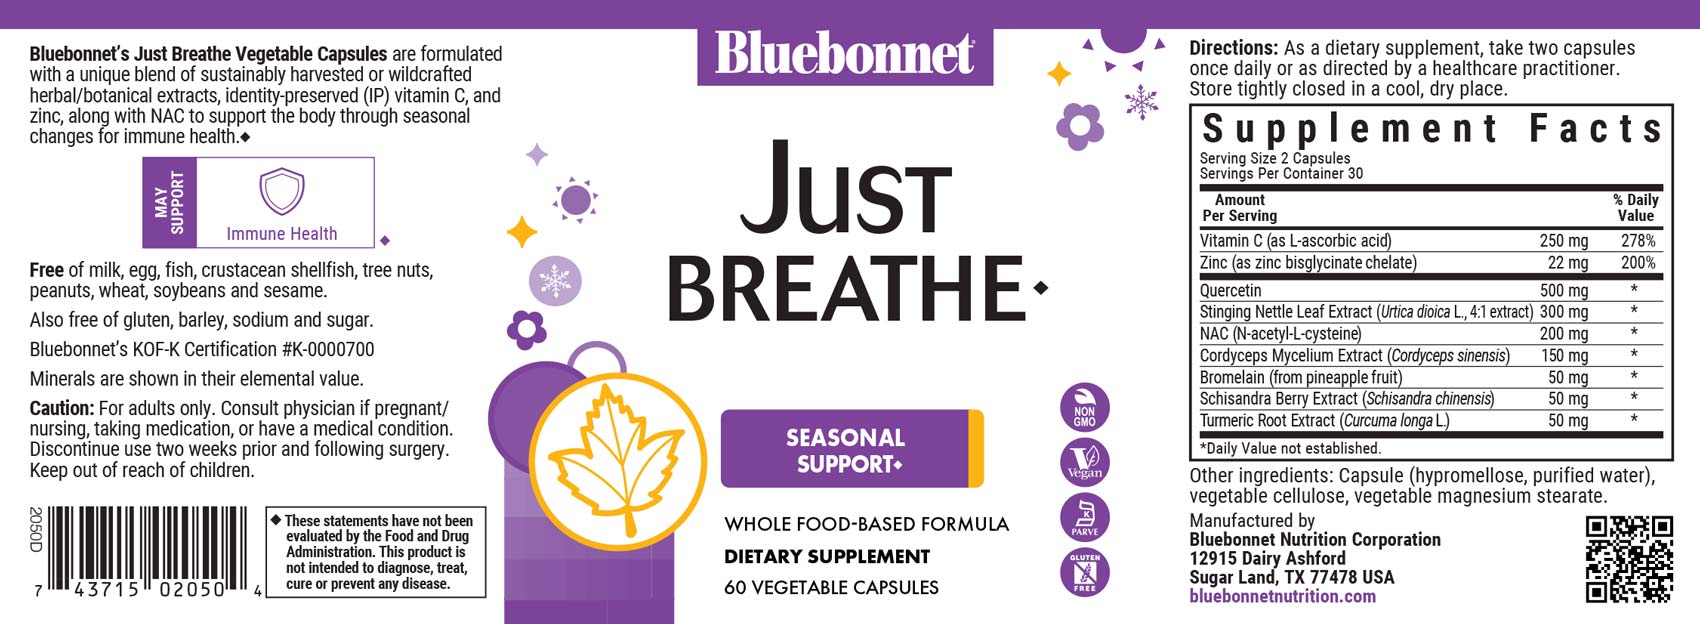 Bluebonnet's Targeted Choice Justbreathe. 60 vegetable capsules